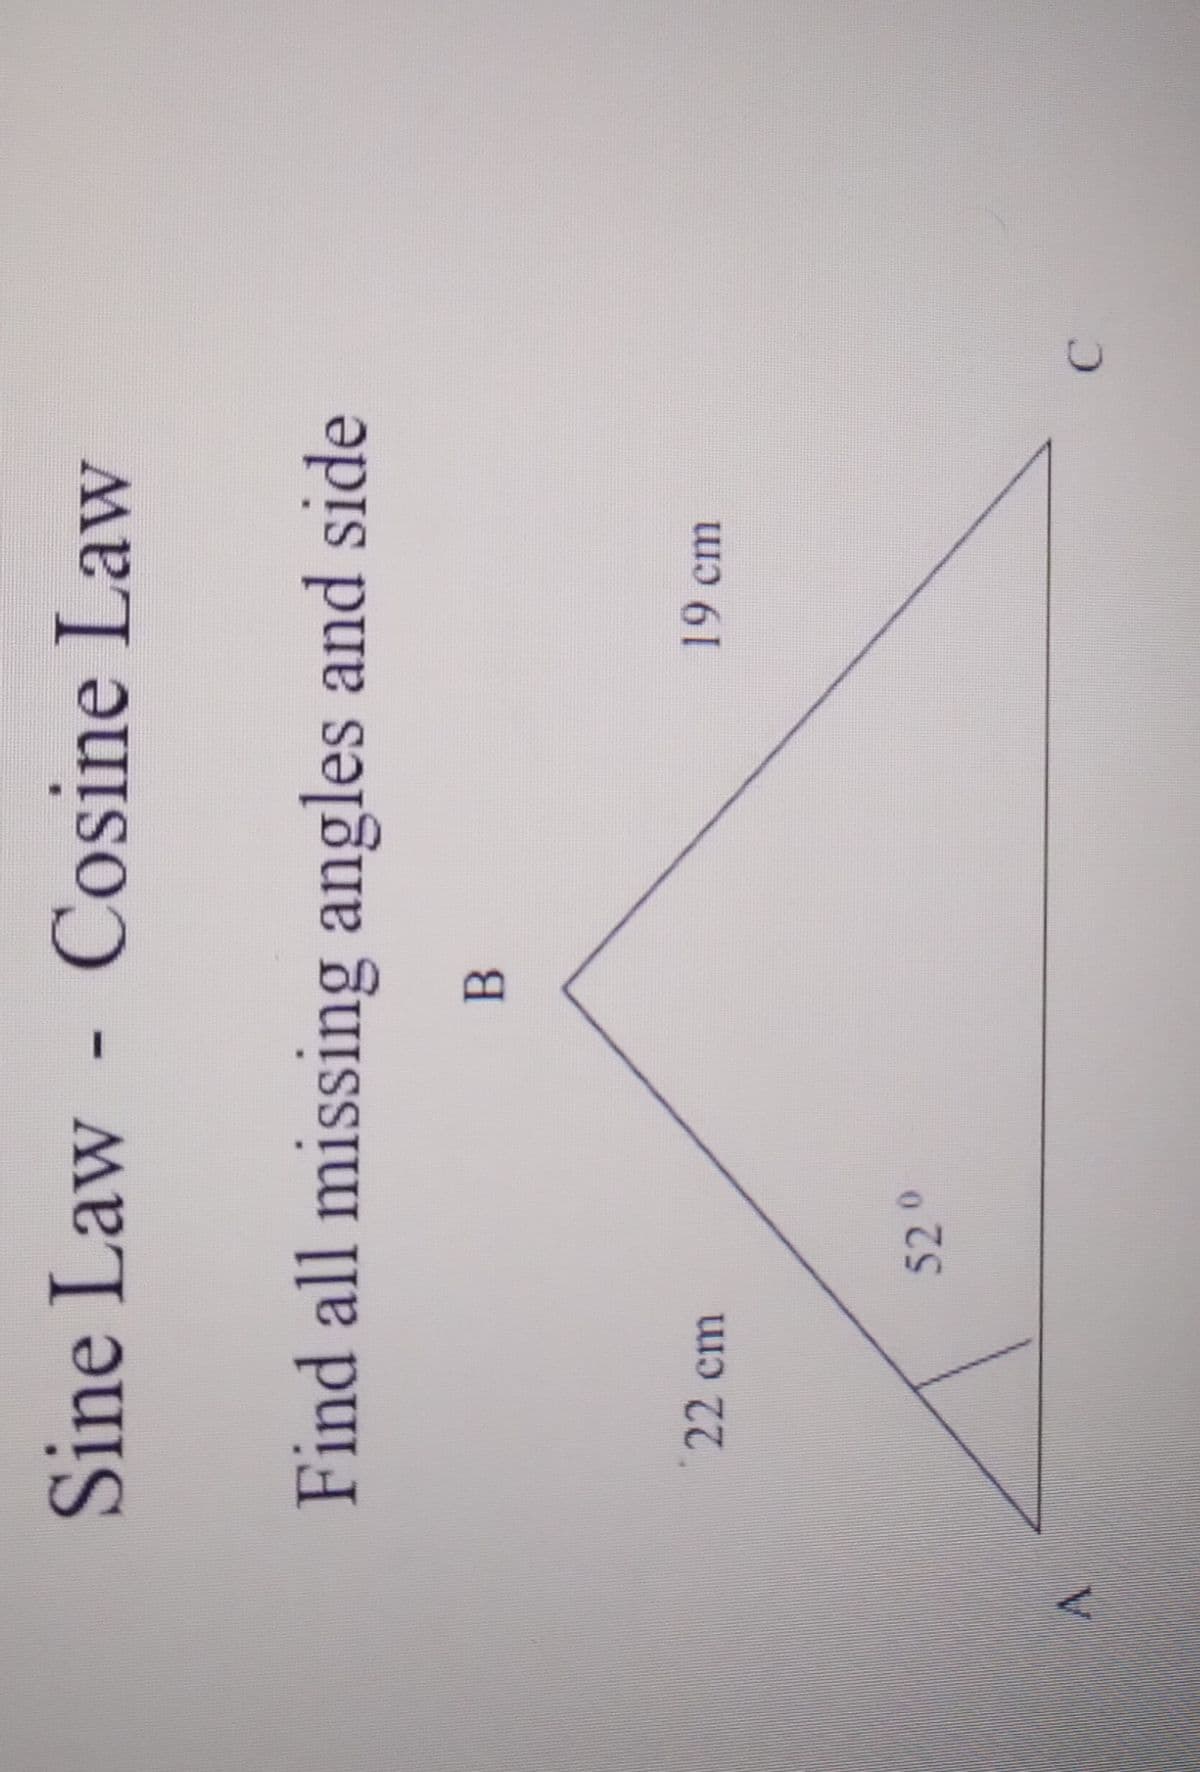 Sine Law
Cosine LaW
Find all missing angles and side
22 cm
19 cm
520
C.
